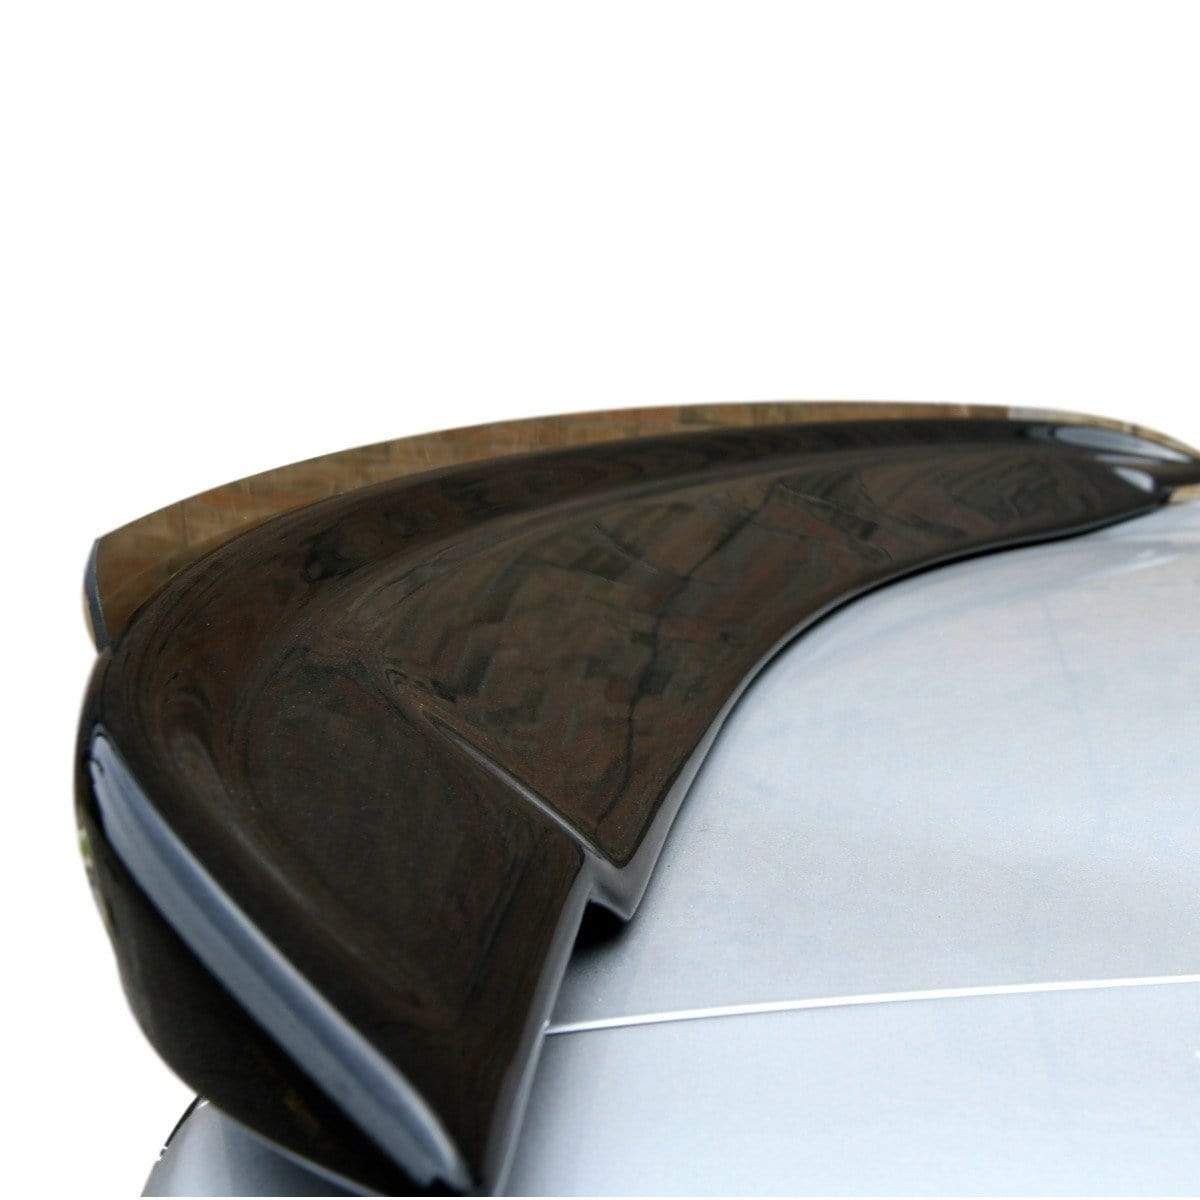 ACS Composite Z/28 Inspired Rear Deck Spoiler [33-4-155]PRM for 2010-2013 Camaro, providing added downforce and style.